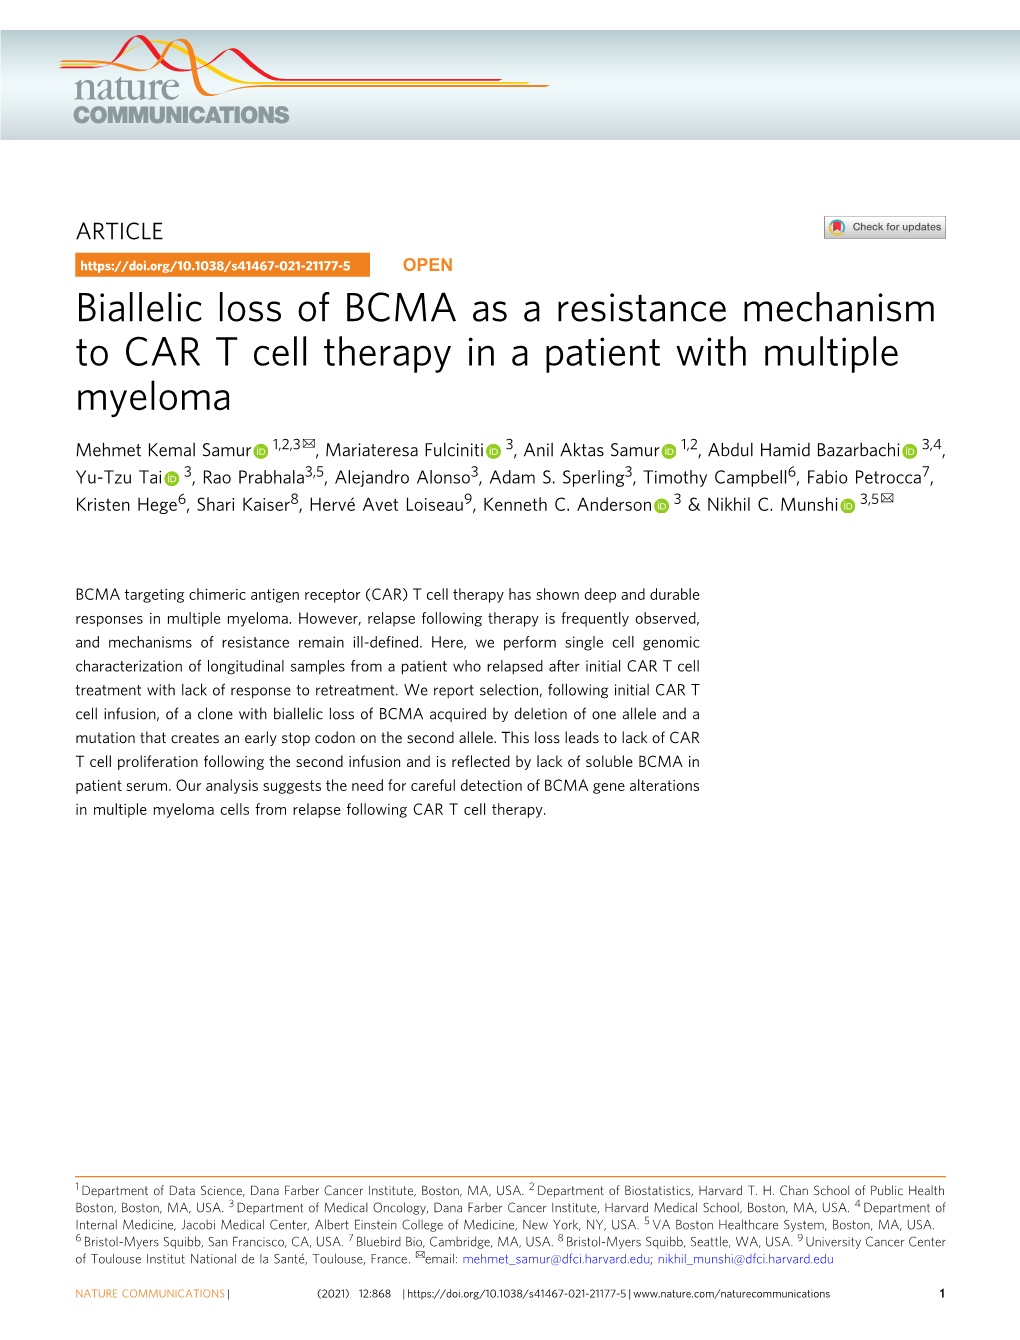 Biallelic Loss of BCMA As a Resistance Mechanism to CAR T Cell Therapy In